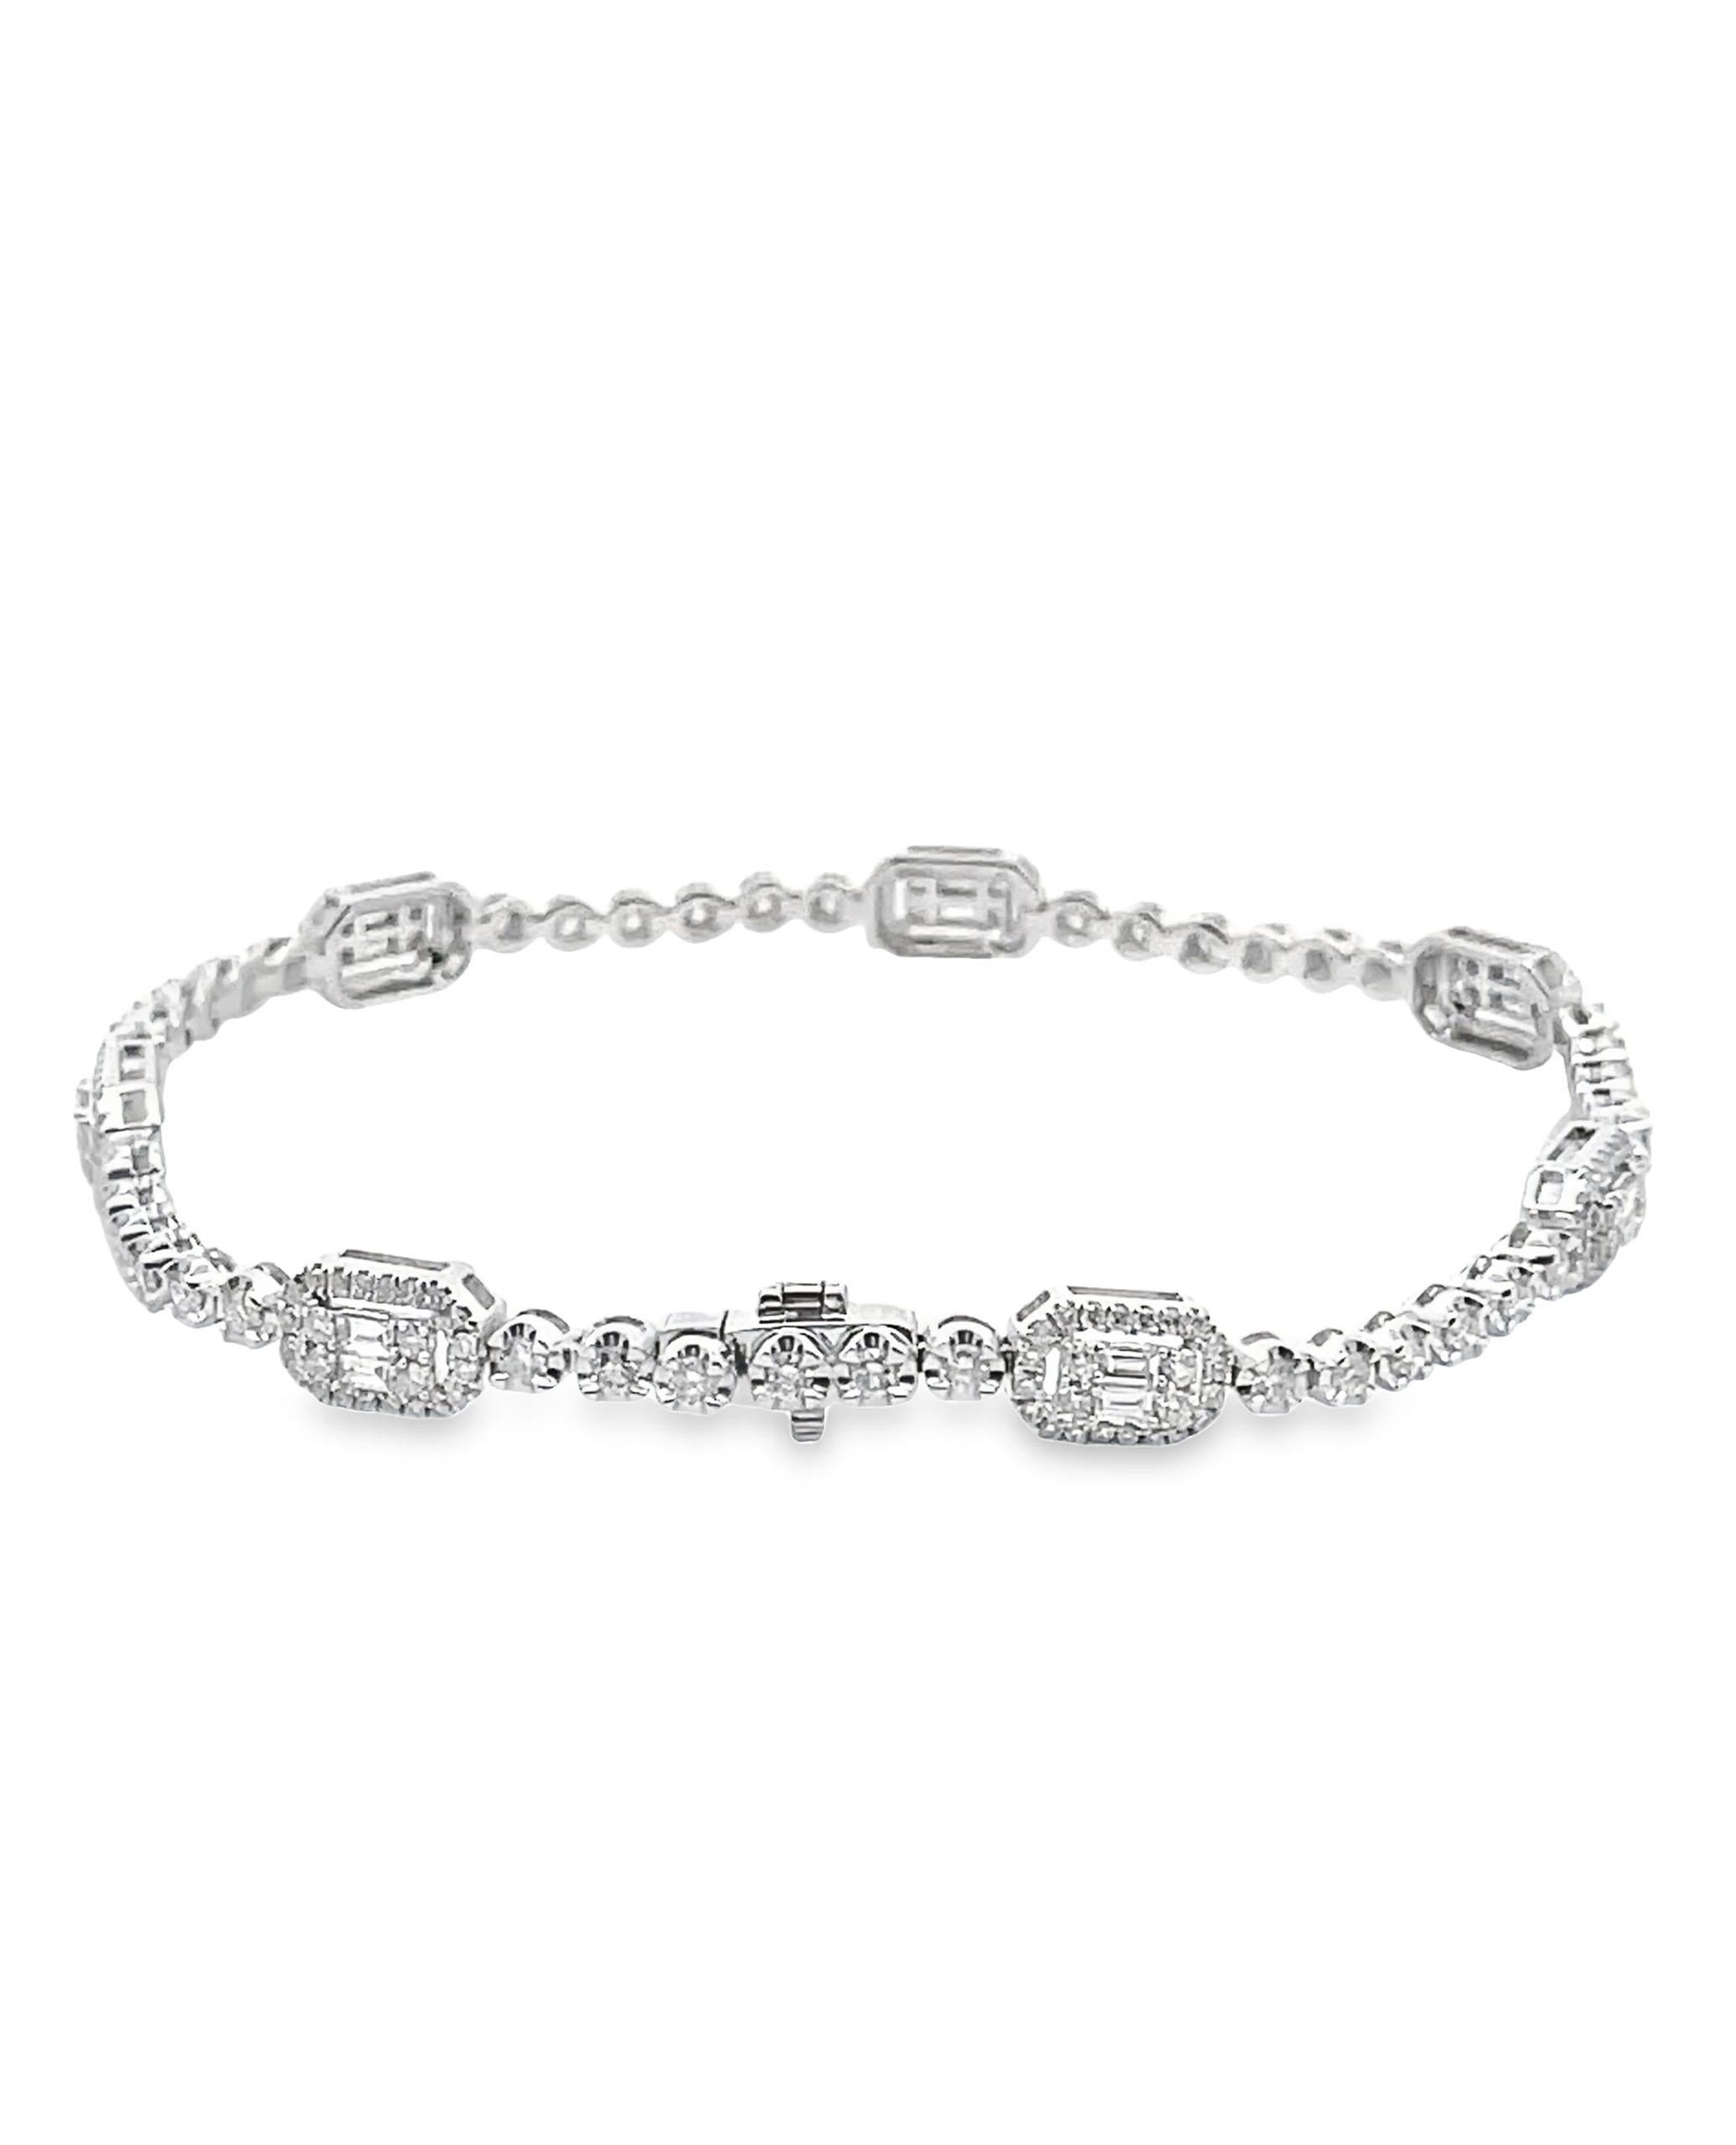 Contemporary 18K White Gold Tennis Bracelet with Round and Baguette Diamonds For Sale